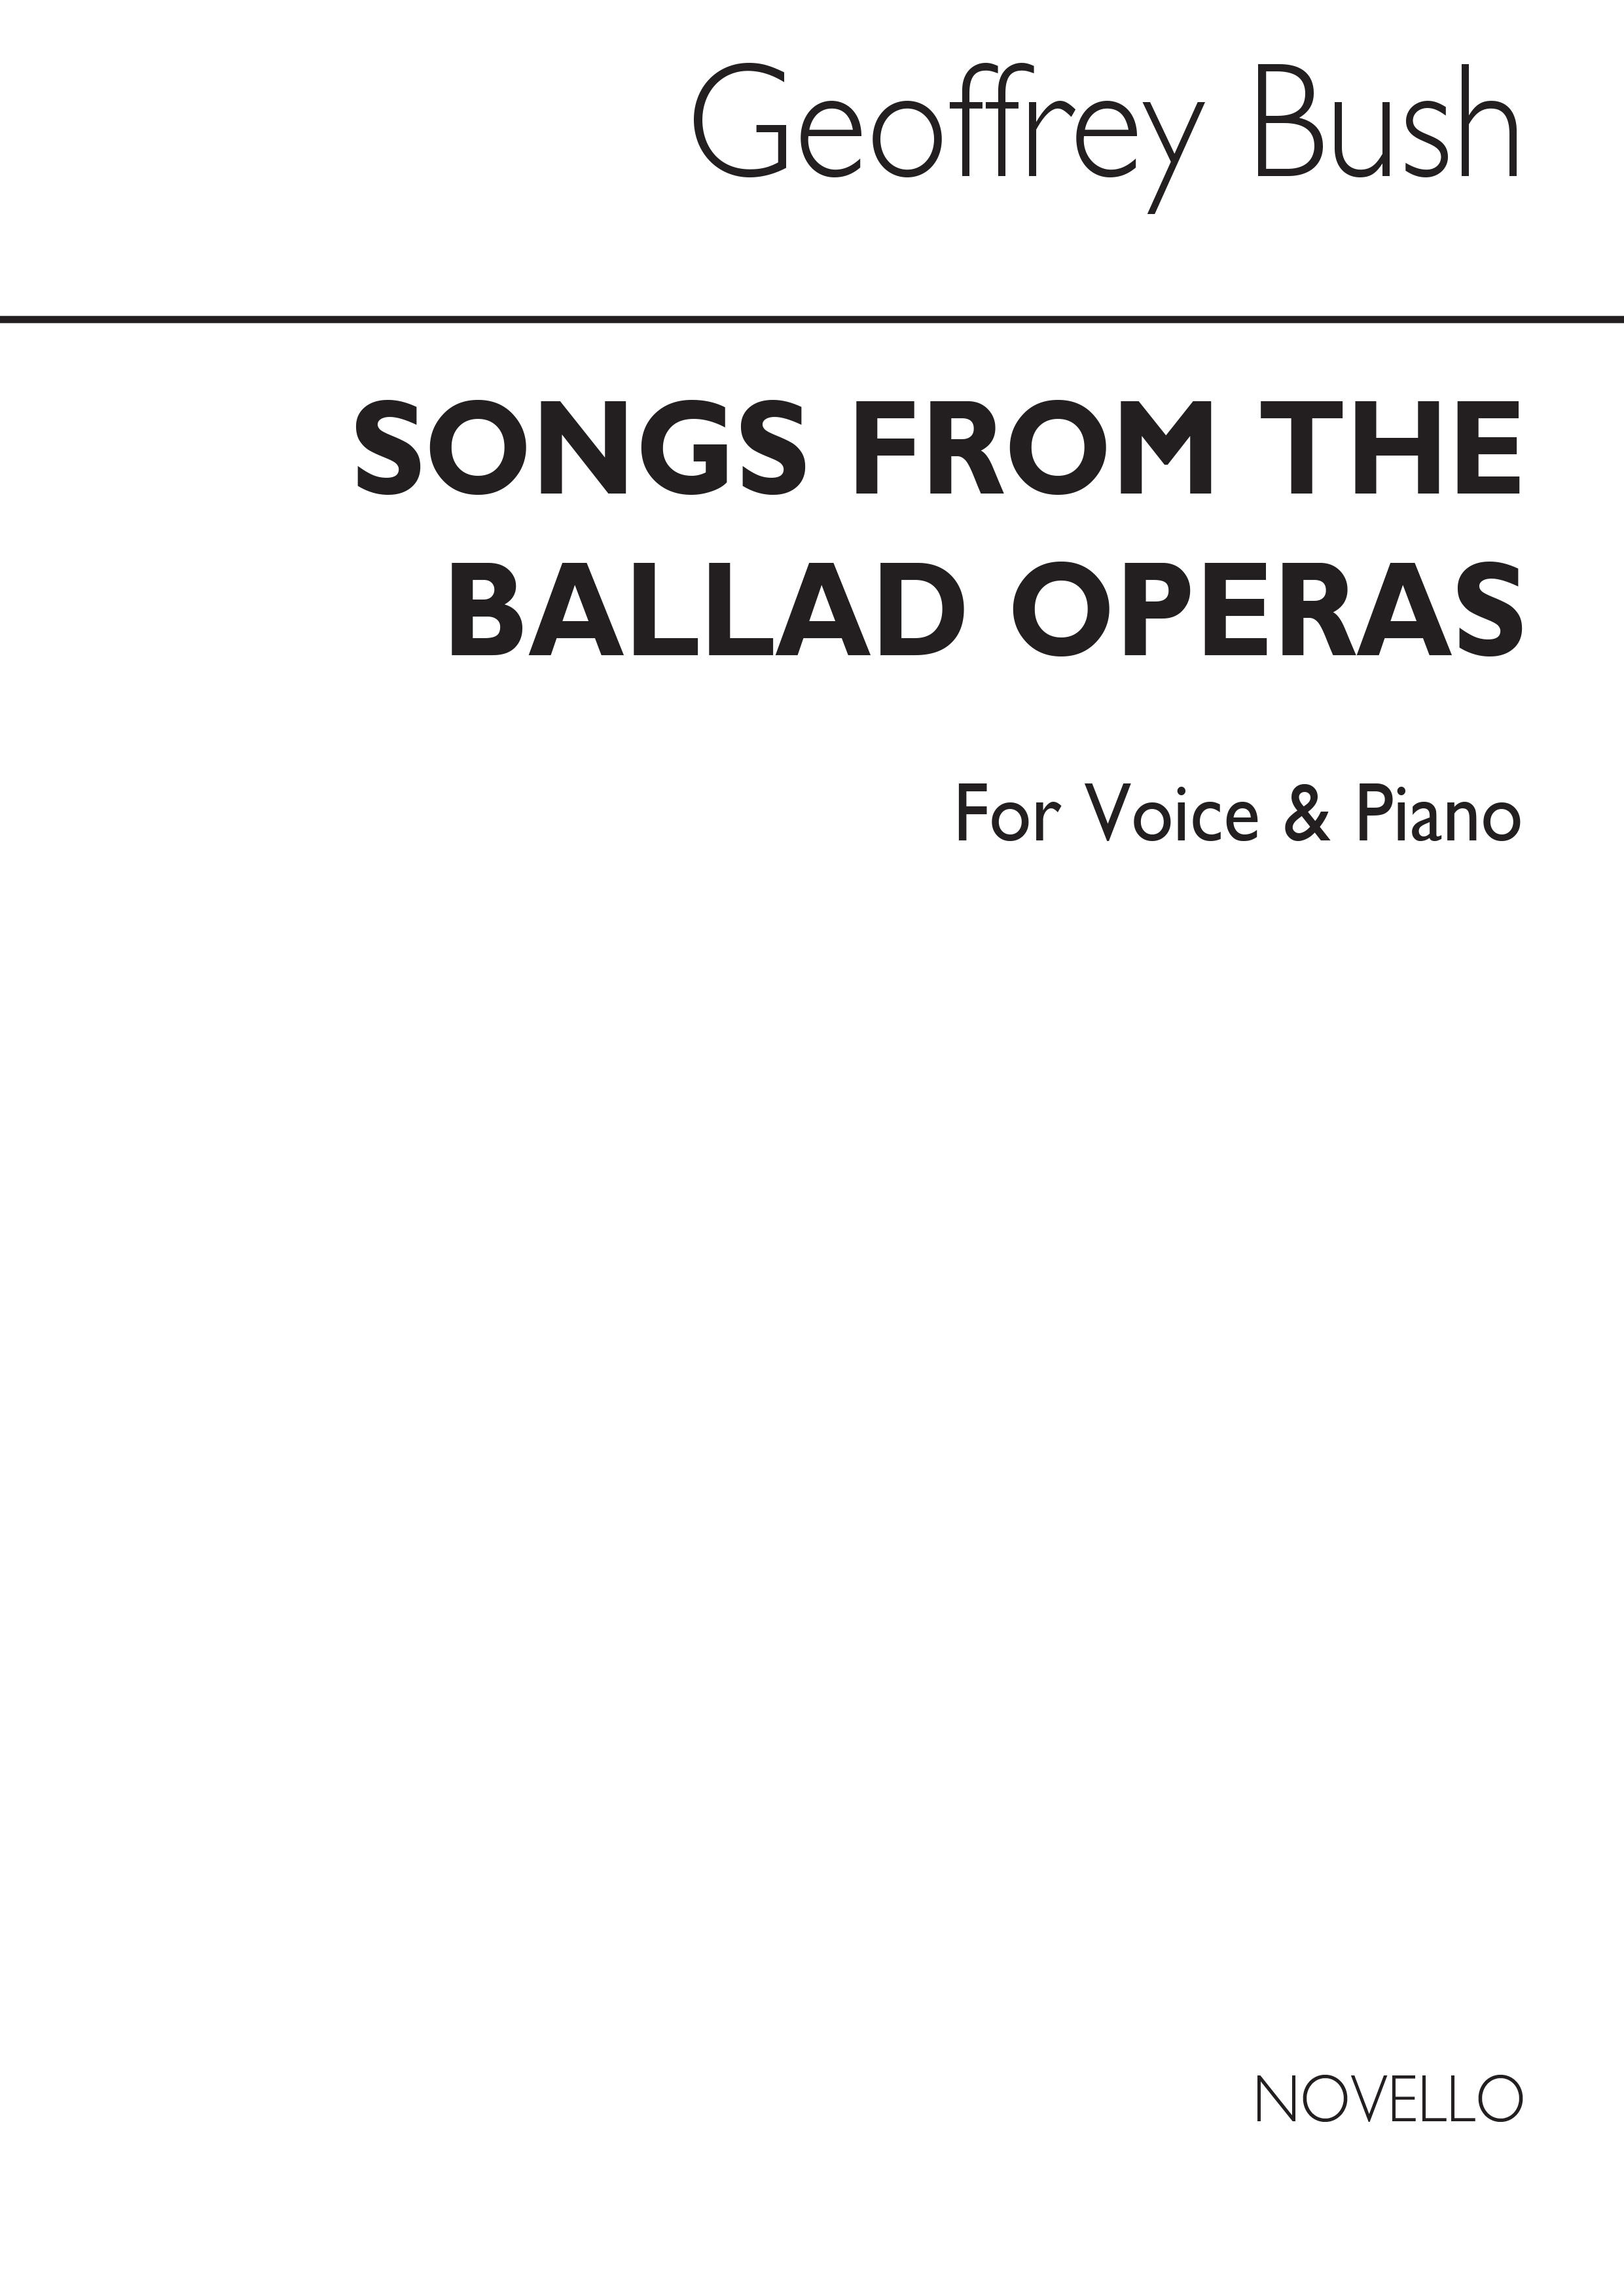 Geoffrey Bush: Songs From The Ballad Operas for Voice and Piano